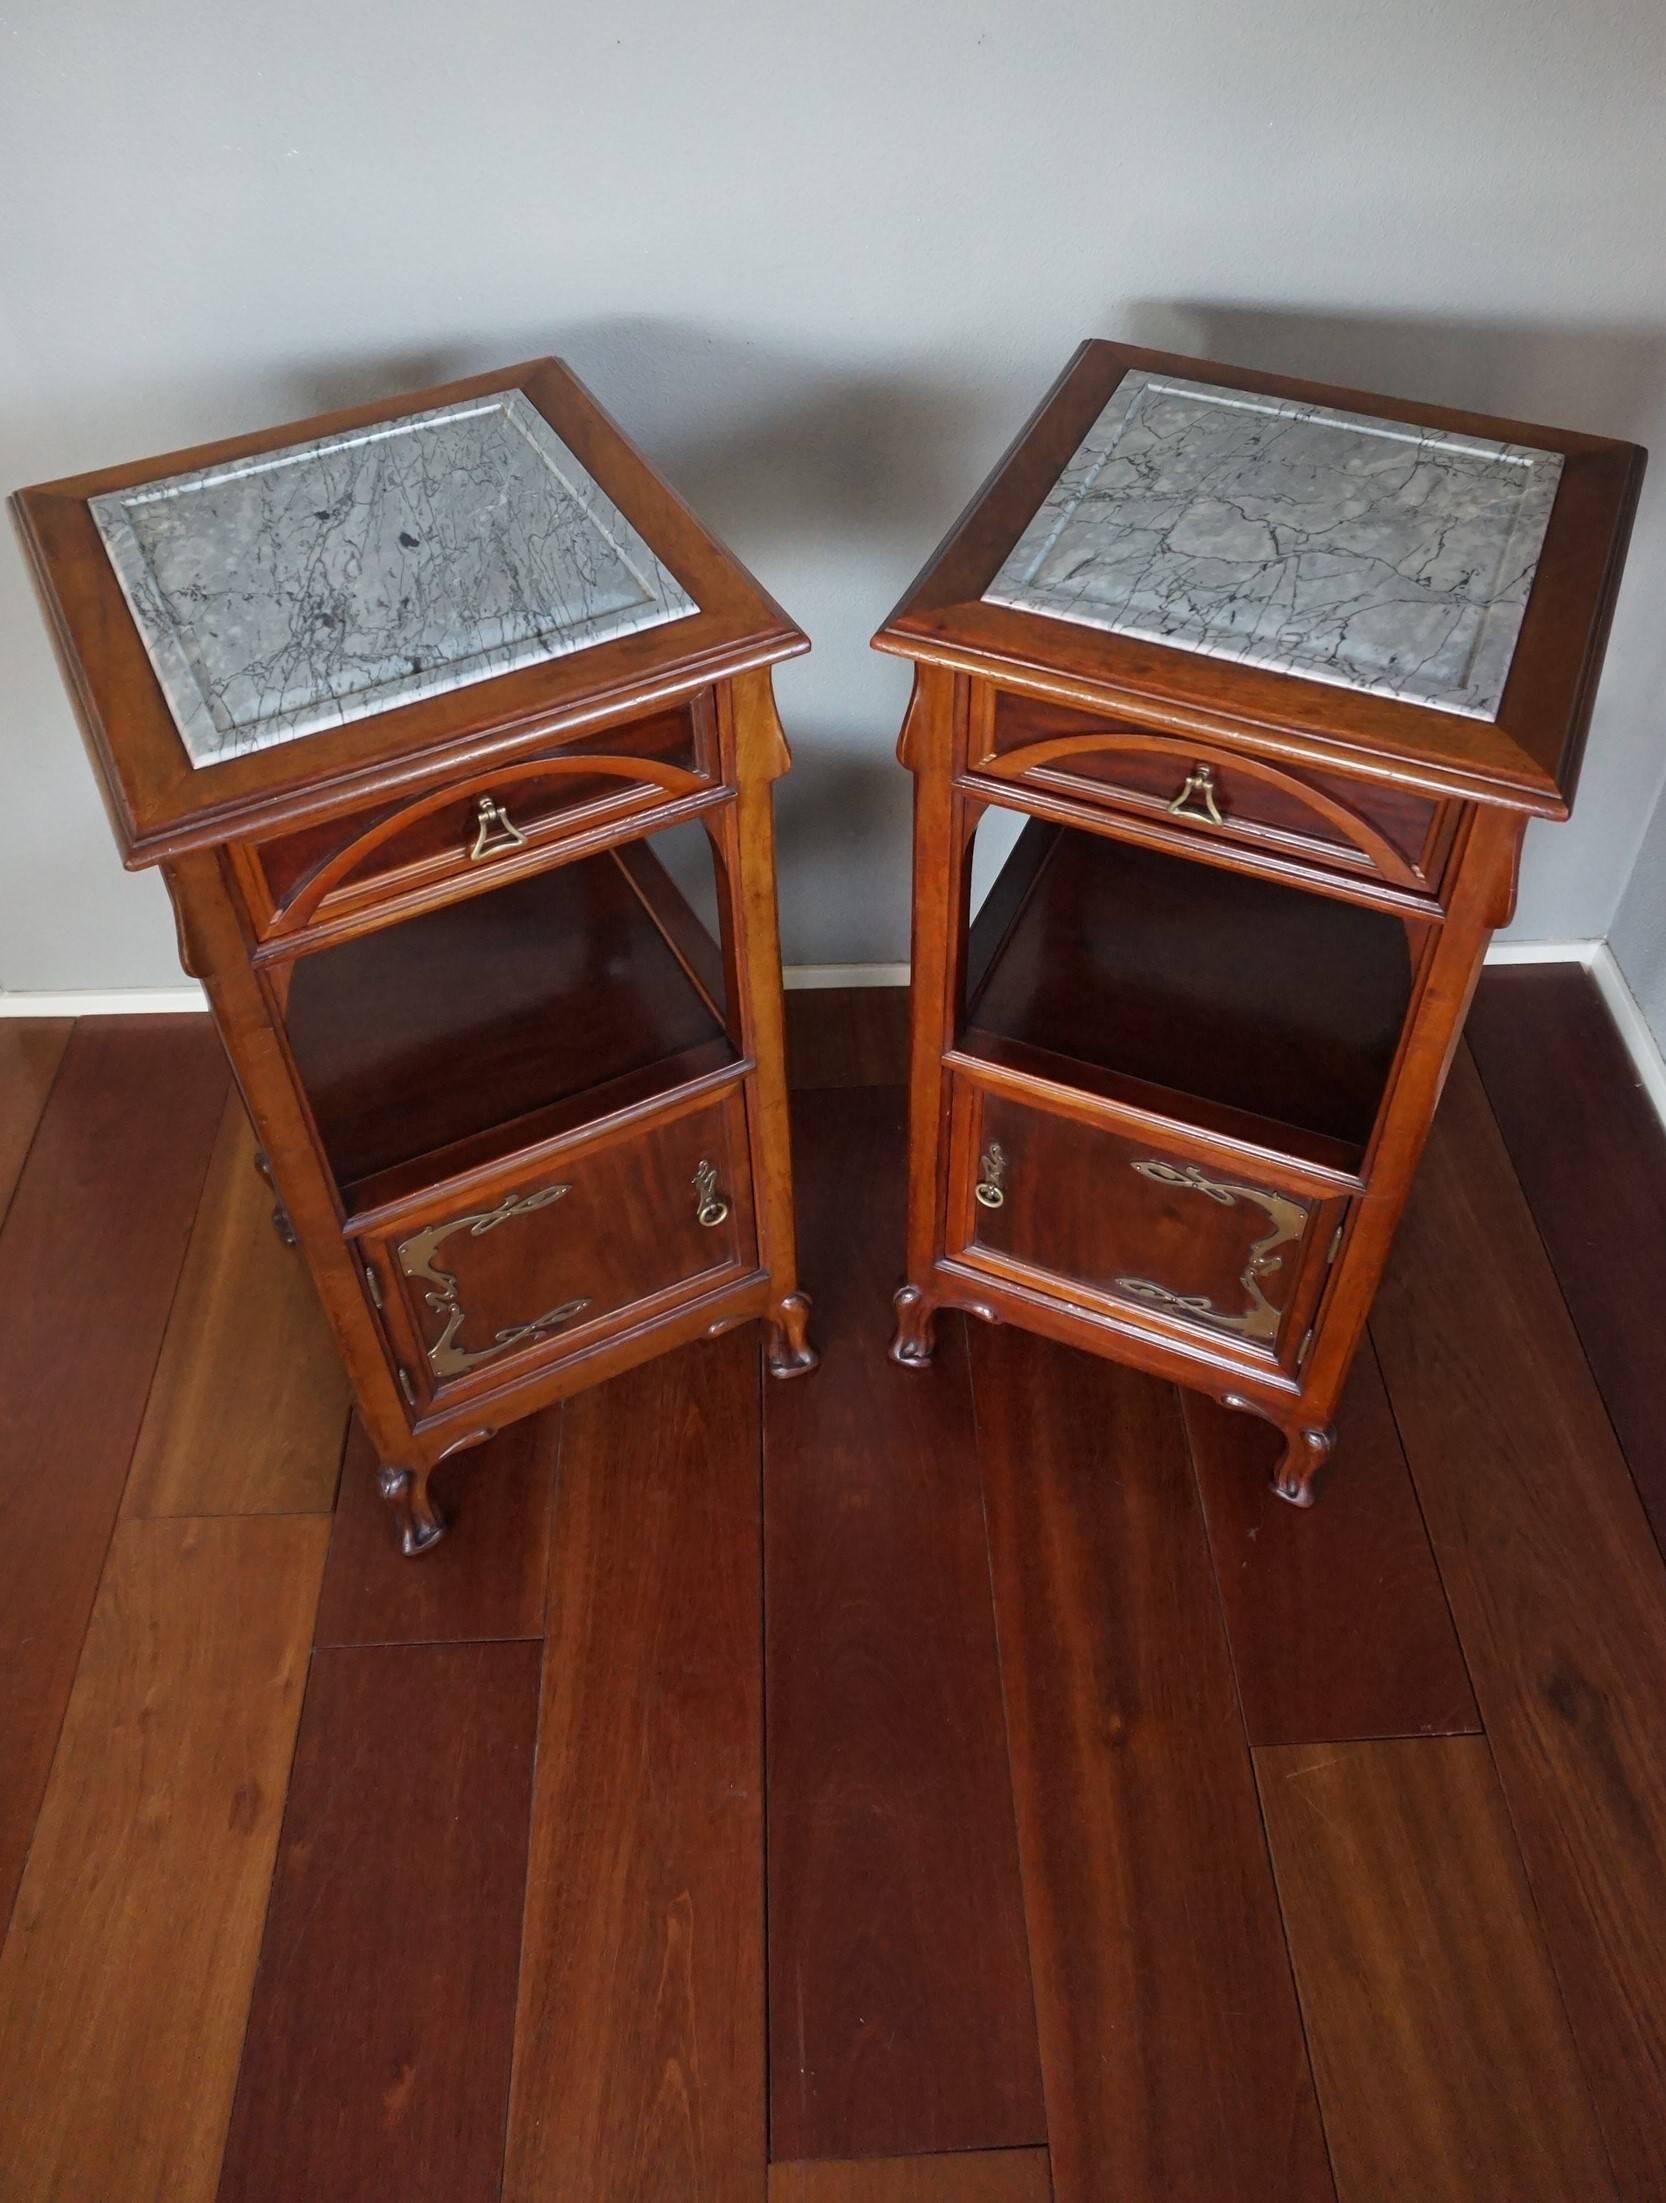 Rare and wonderful 'Ecole de Nancy' style nightstands.

This sizable and beautifully hand-crafted pair is almost entirely made of solid mahogany and the patina is breath-taking. These cabinets are not marked, but it is clear that only a top